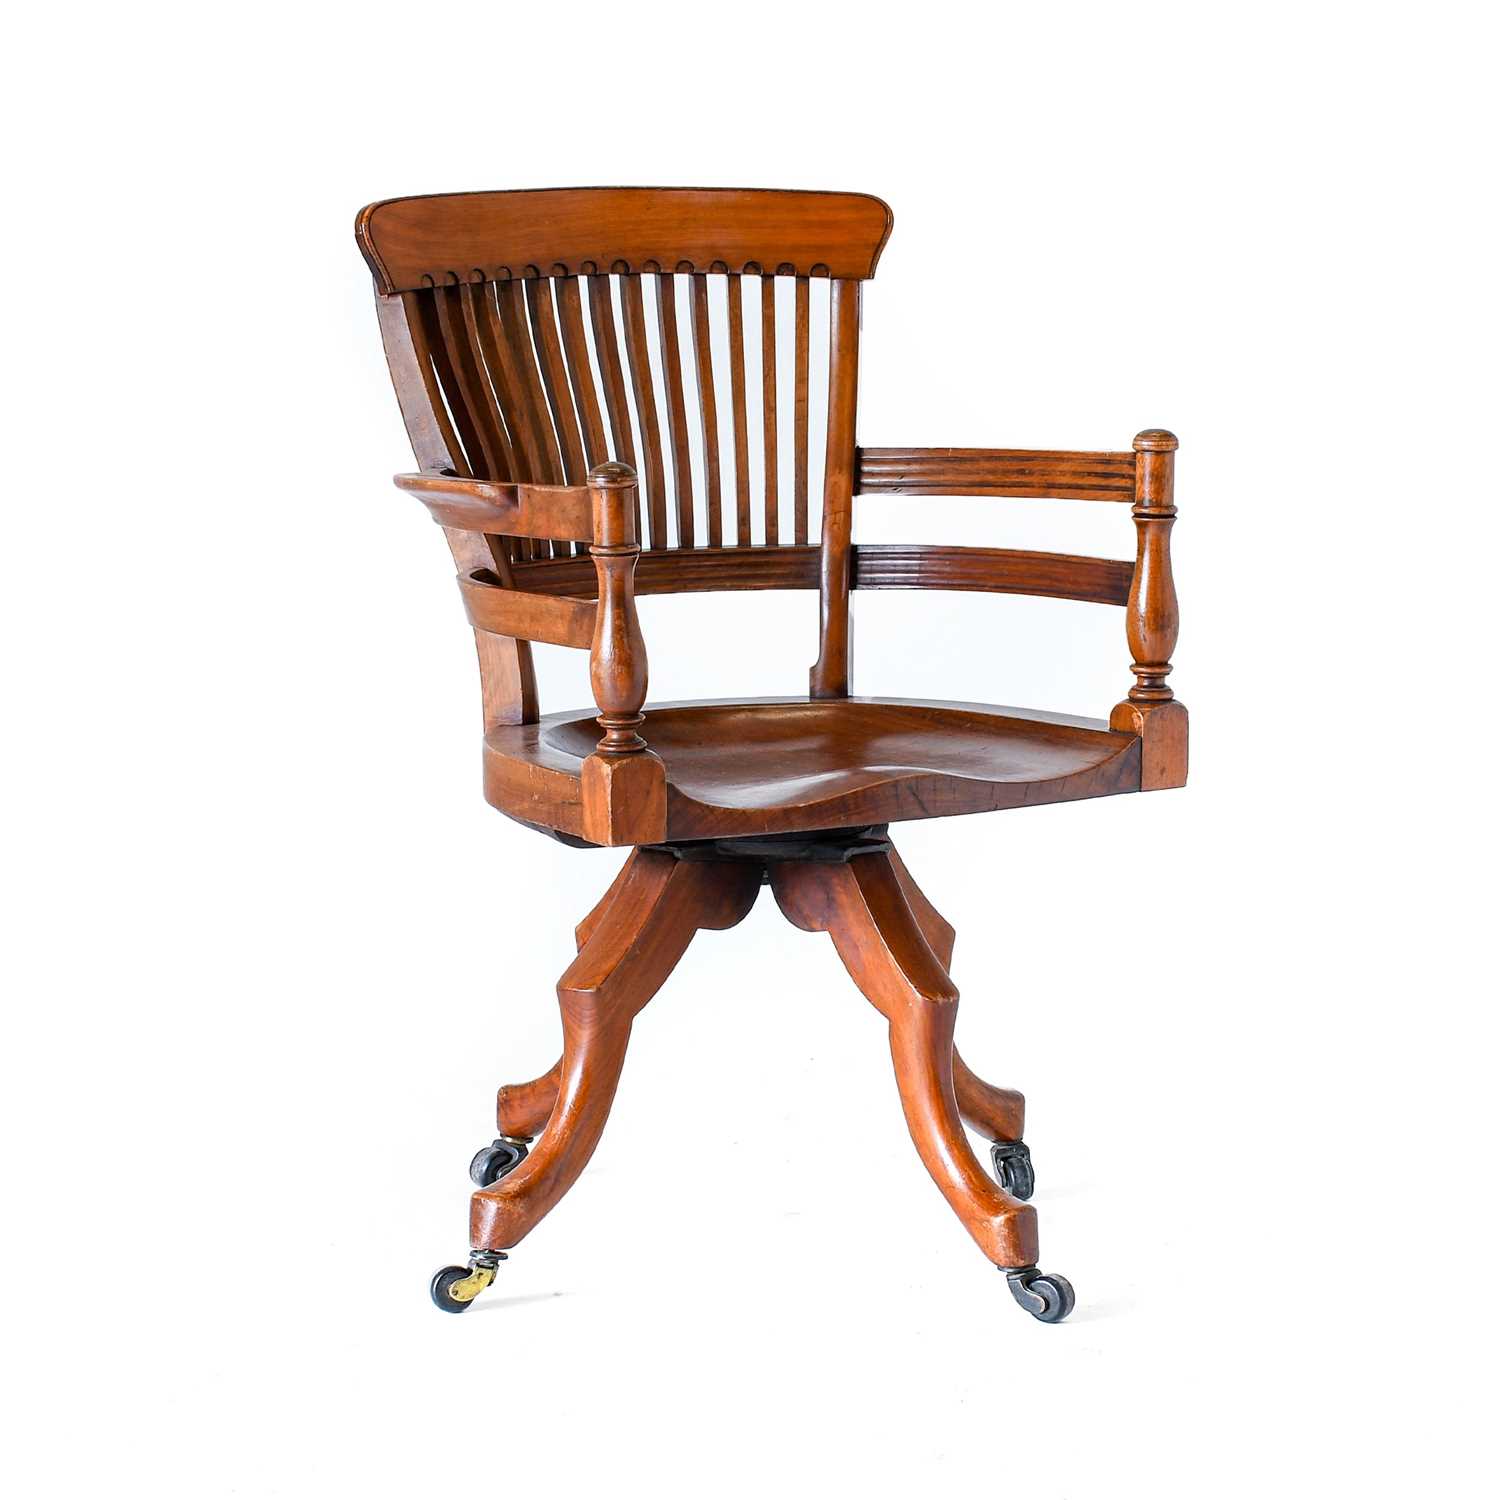 An Aesthetic Movement Walnut Office Swivel Chair, designed by E.W.Godwin, slatted back, shaped arms,